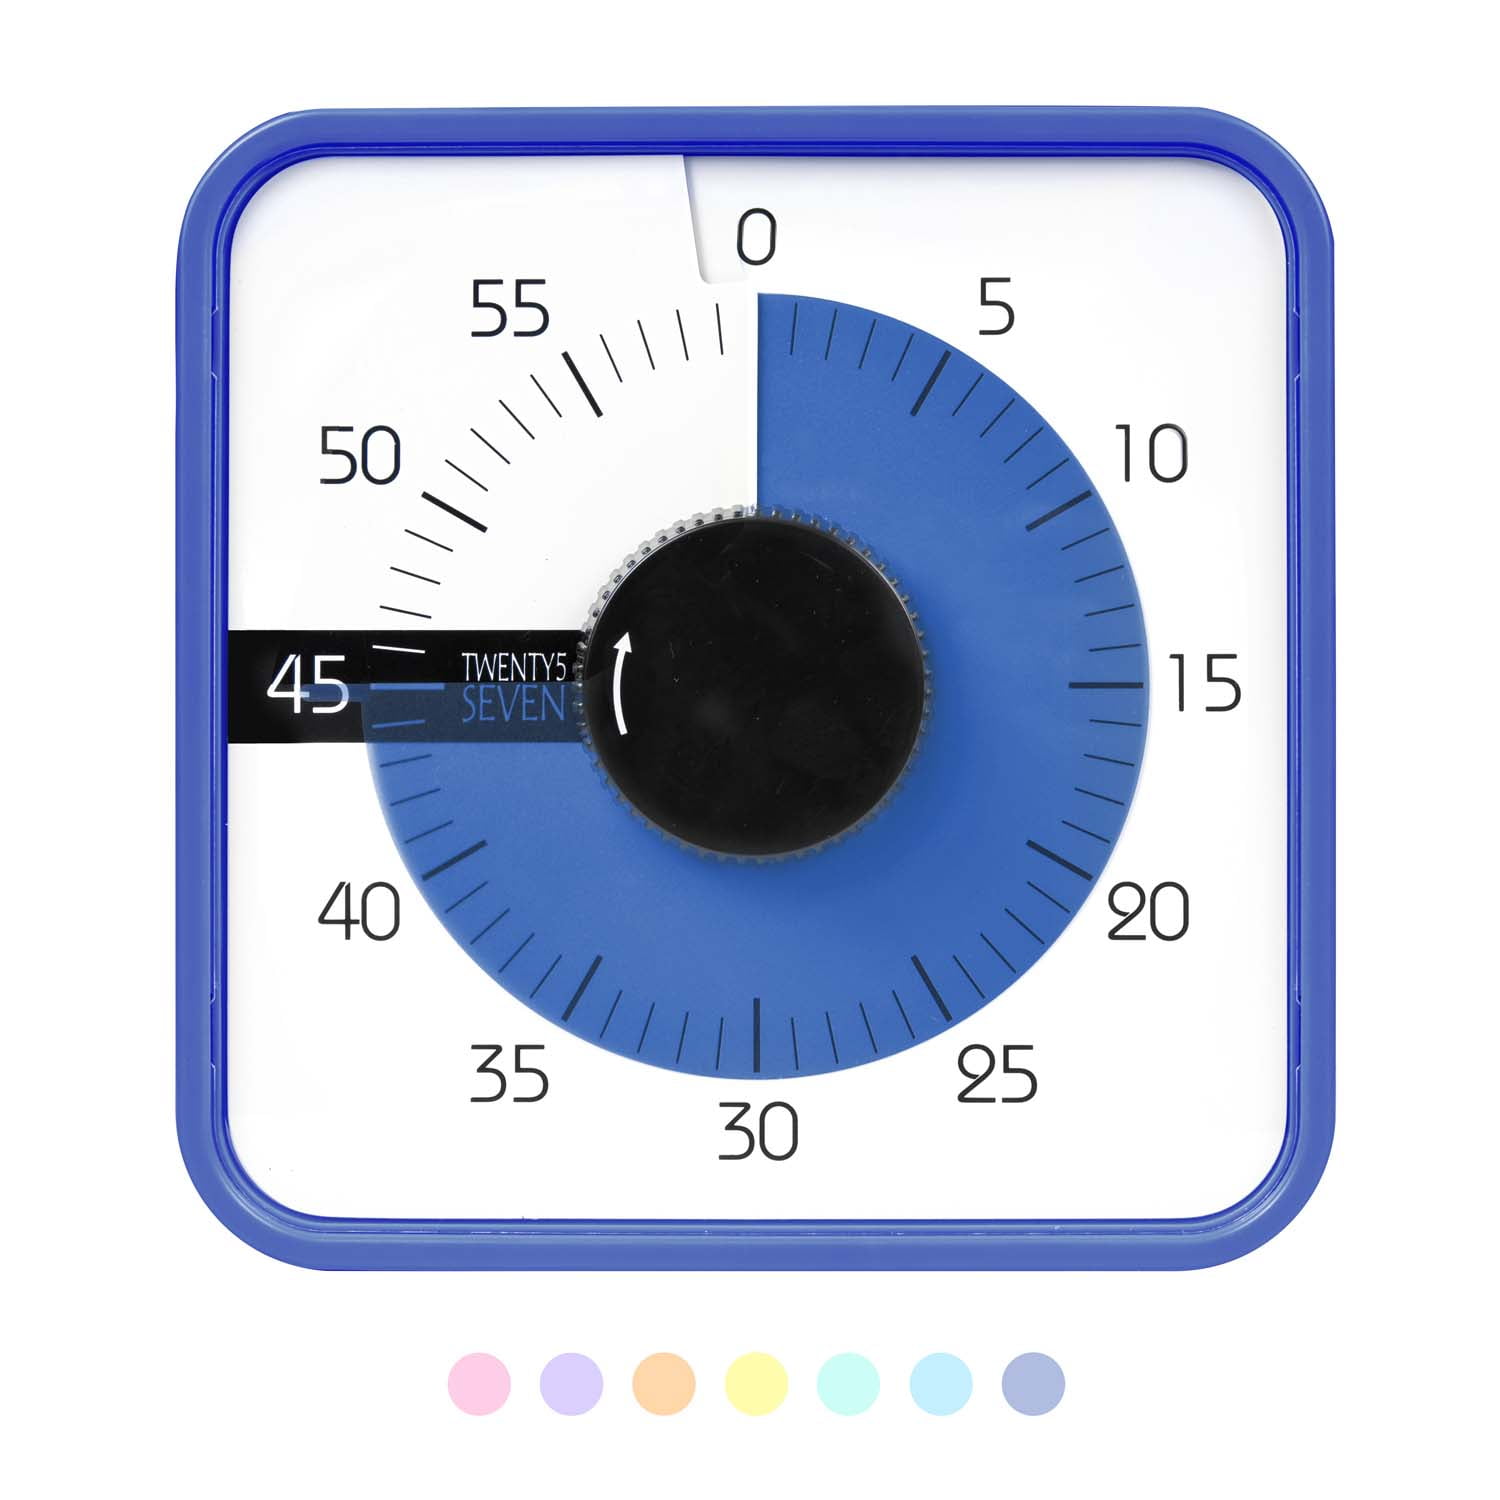 aGIOGIO 60-Minute Visual Countdown Timer,7.5 Inch Oversize Classroom Visual  Timer for Kids and Adults, Mechanical Kitchen Timer Clock with Magnetic  Backing (Blue, Square) price in Saudi Arabia,  Saudi Arabia